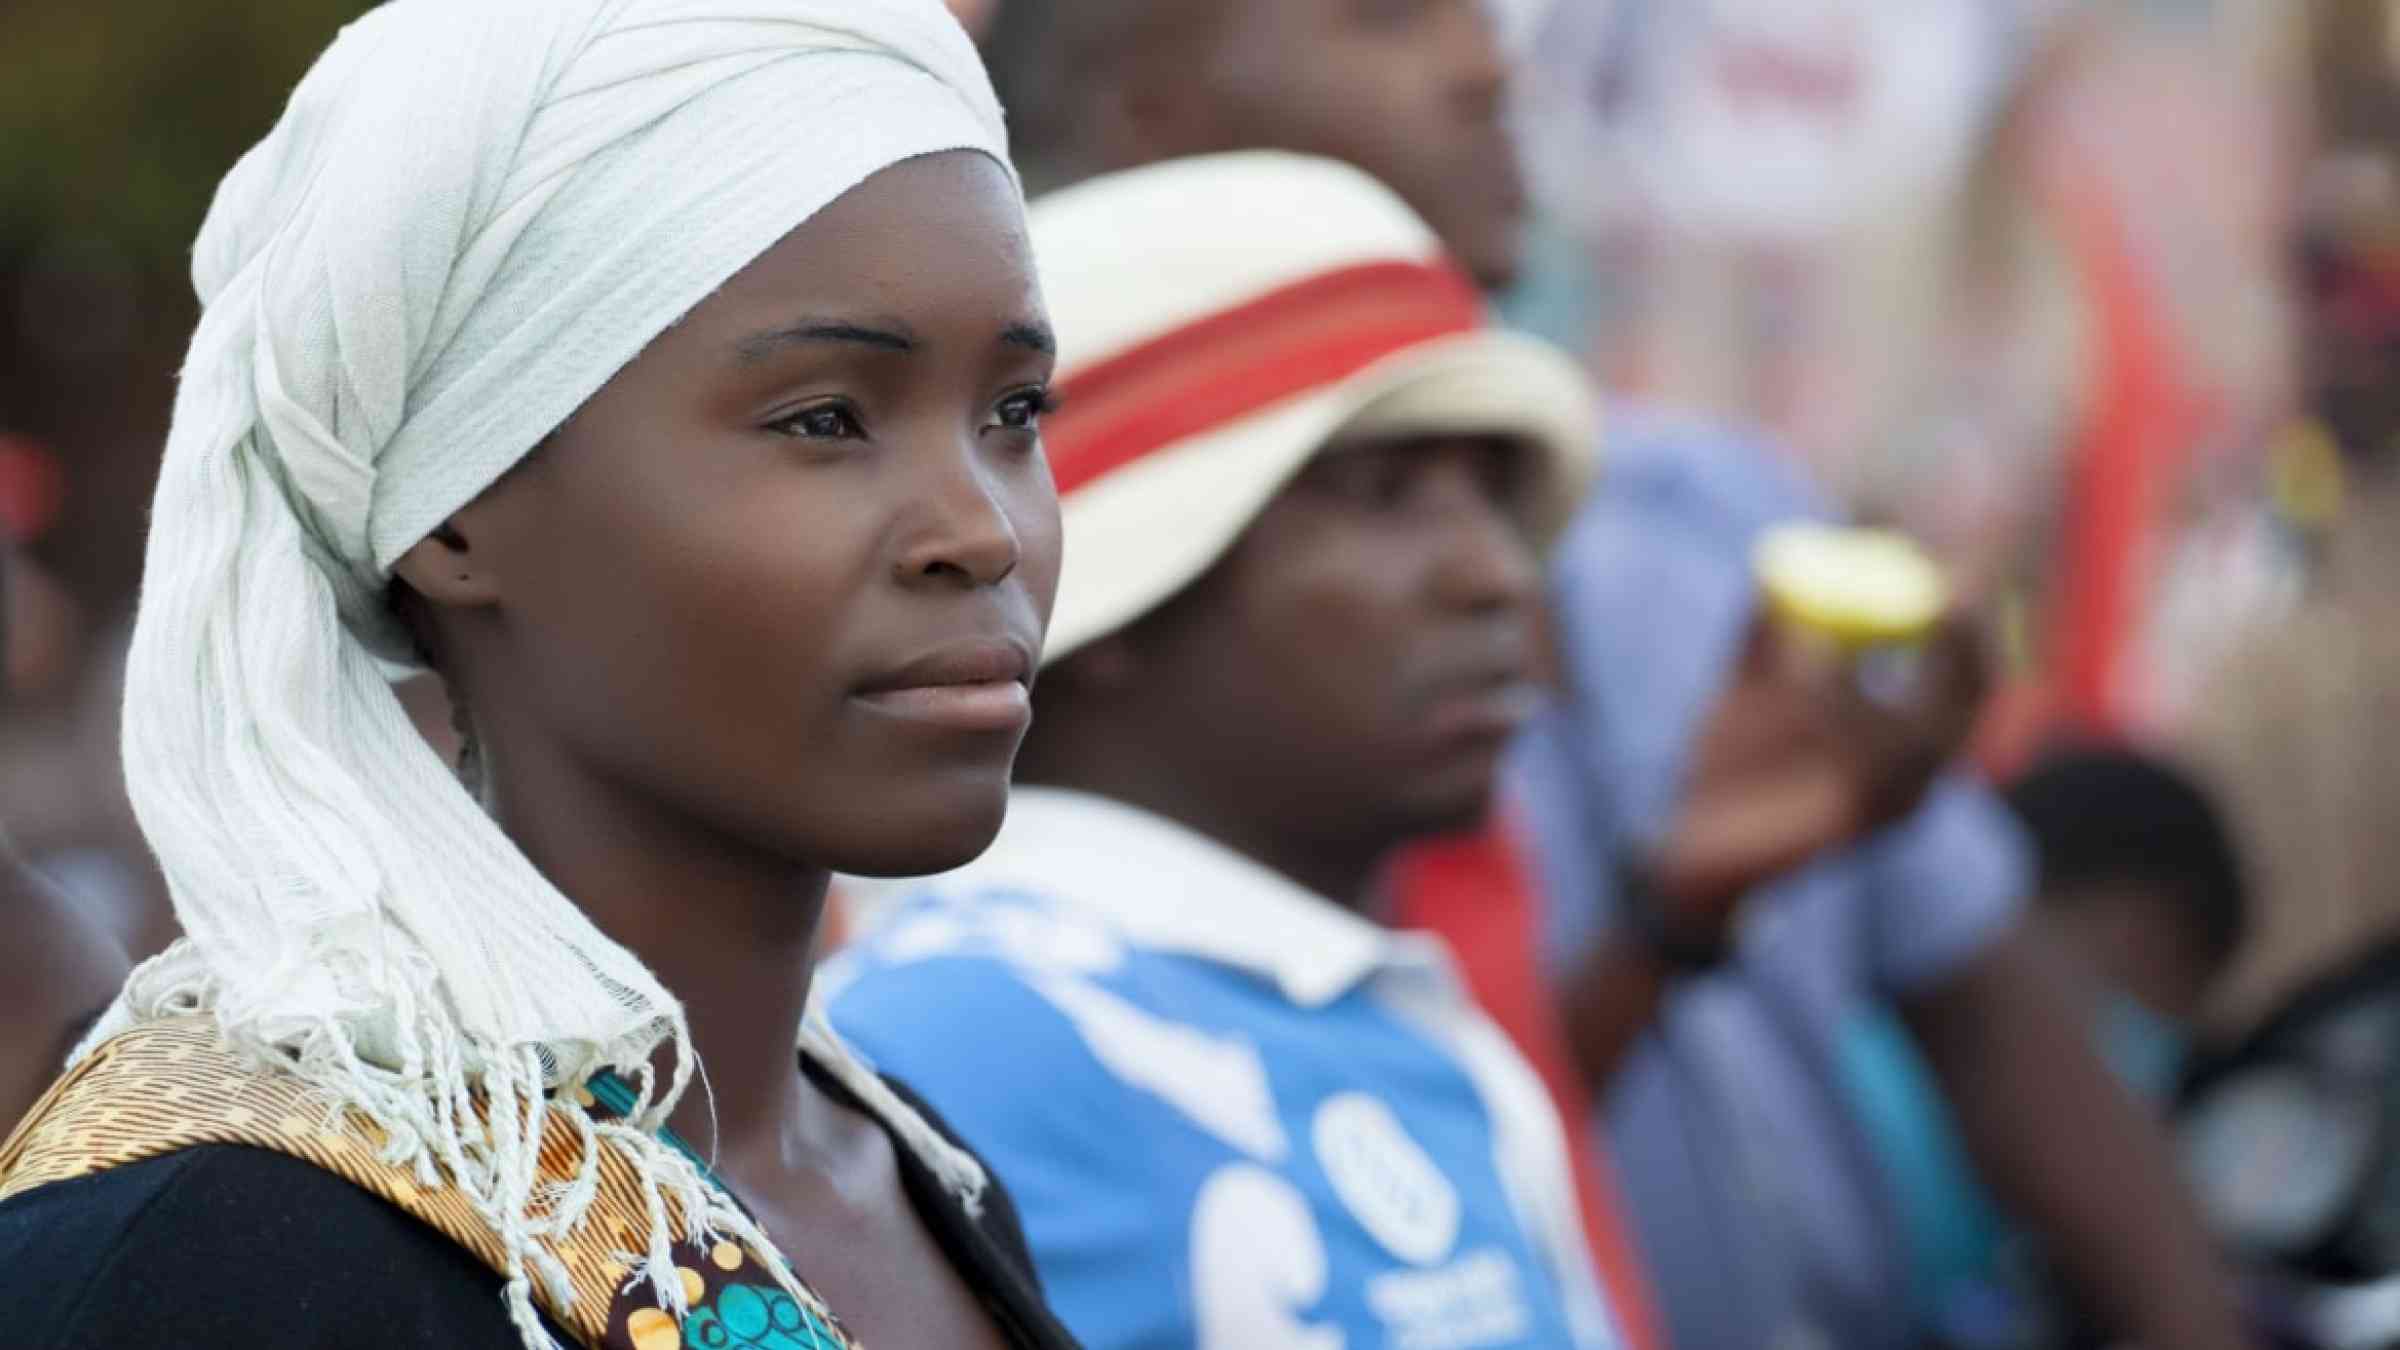 Young woman wearing a traditional scarf on her head attends a public event in Northern Mozambique